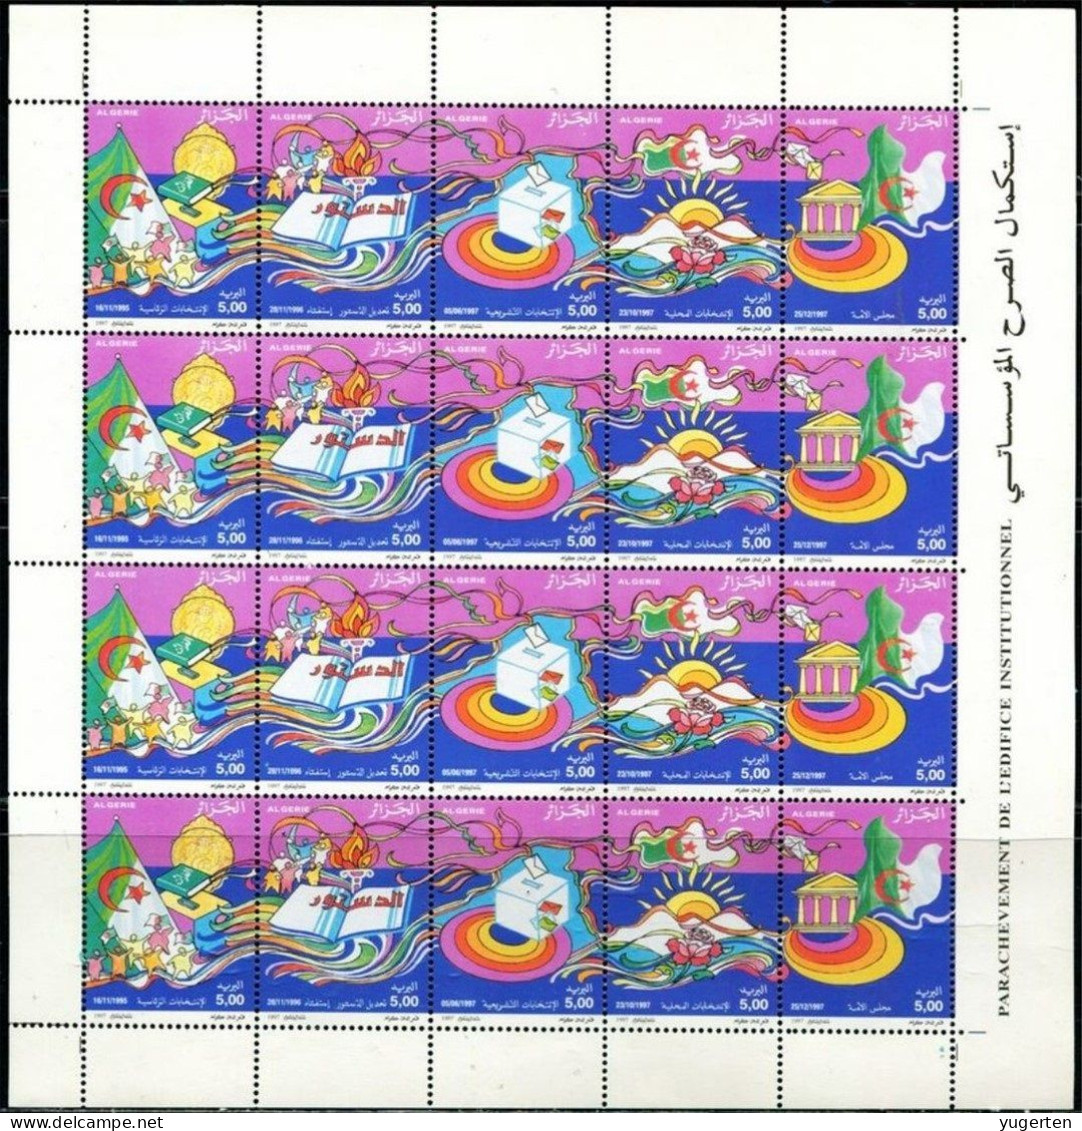 ALGERIA ALGERIE 1997- 1 Sheet - MNH - Completion Of Institutions - Democracy - Vote - Elections - 4 Sets - Flag Flags - Algeria (1962-...)